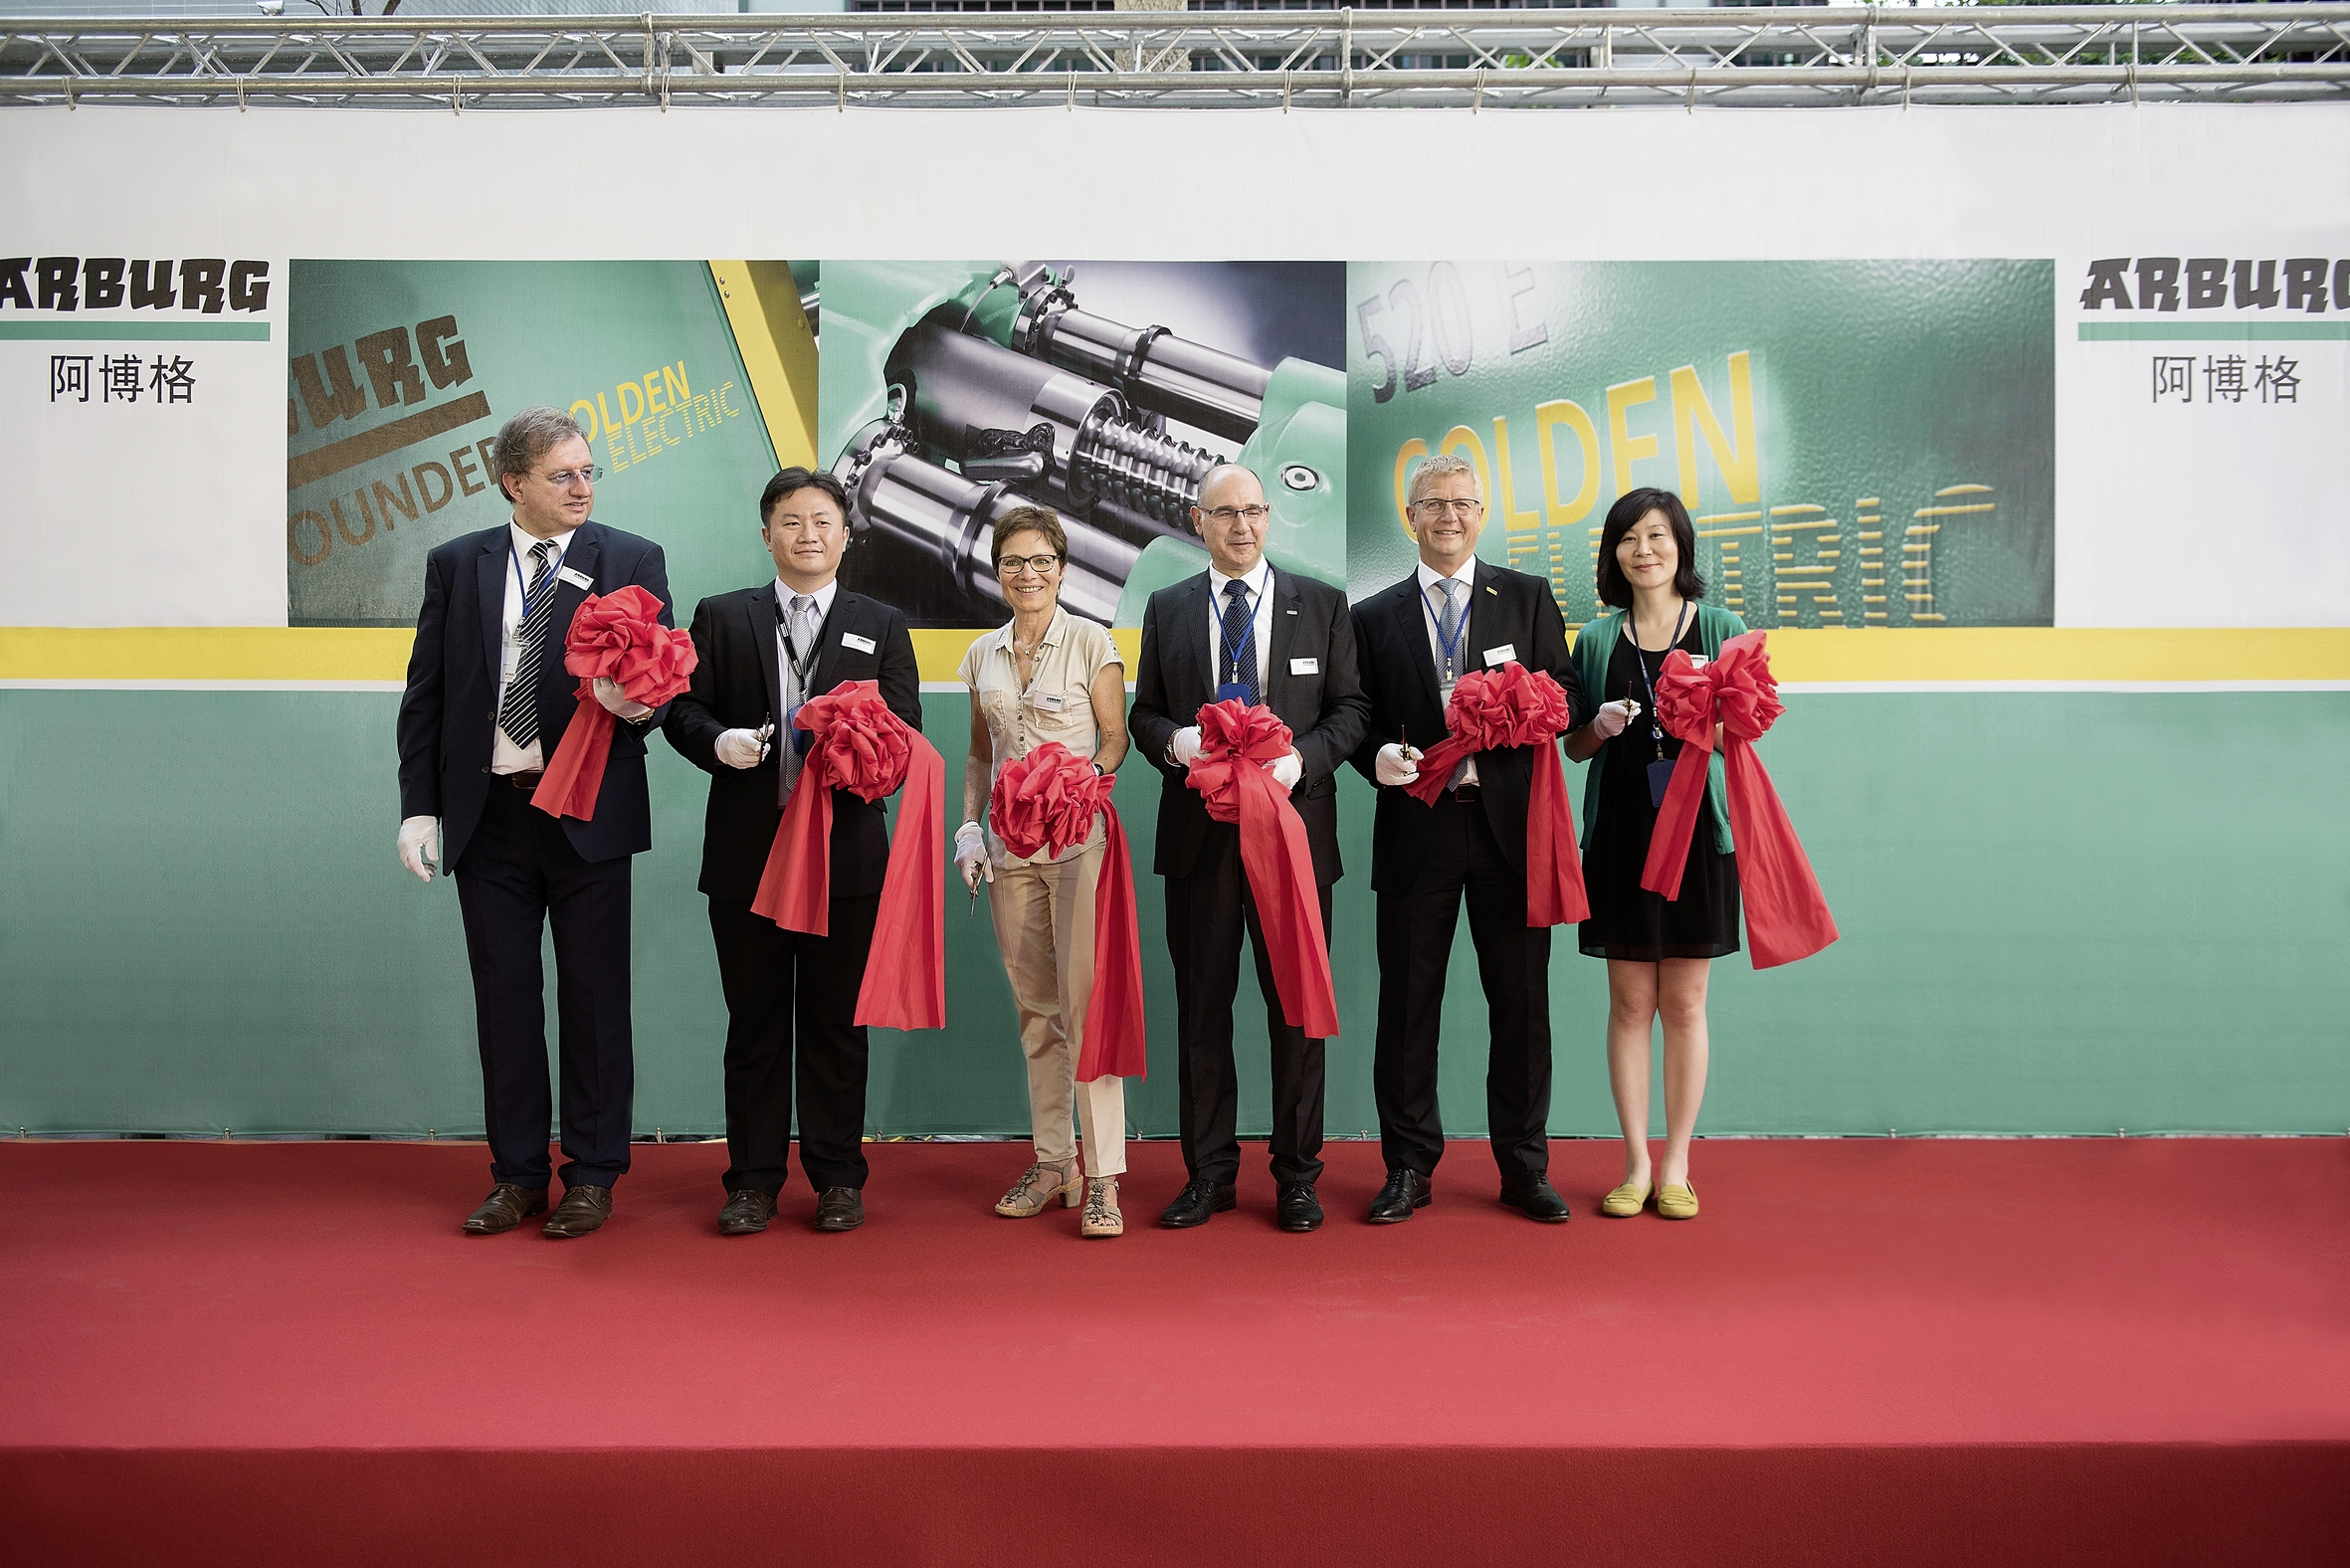 Inauguration ceremony for the Arburg subsidiary in Taiwan: Renate Keinath (3rd from left), Managing Partner, Michael Huang (2nd from left), Managing Director of the Arburg subsidiary in Taiwan, Gerhard Böhm (2nd from right), Managing Director Sales, Andrea Carta (3rd from right), Overseas Sales Director, Georg Anzer (left), Georg Anzer (left), Human Resource Management Director, and Hazel Liu (right), Senior Finance Manager in Taiwan. Photo: ARBURG - Traveler H. 